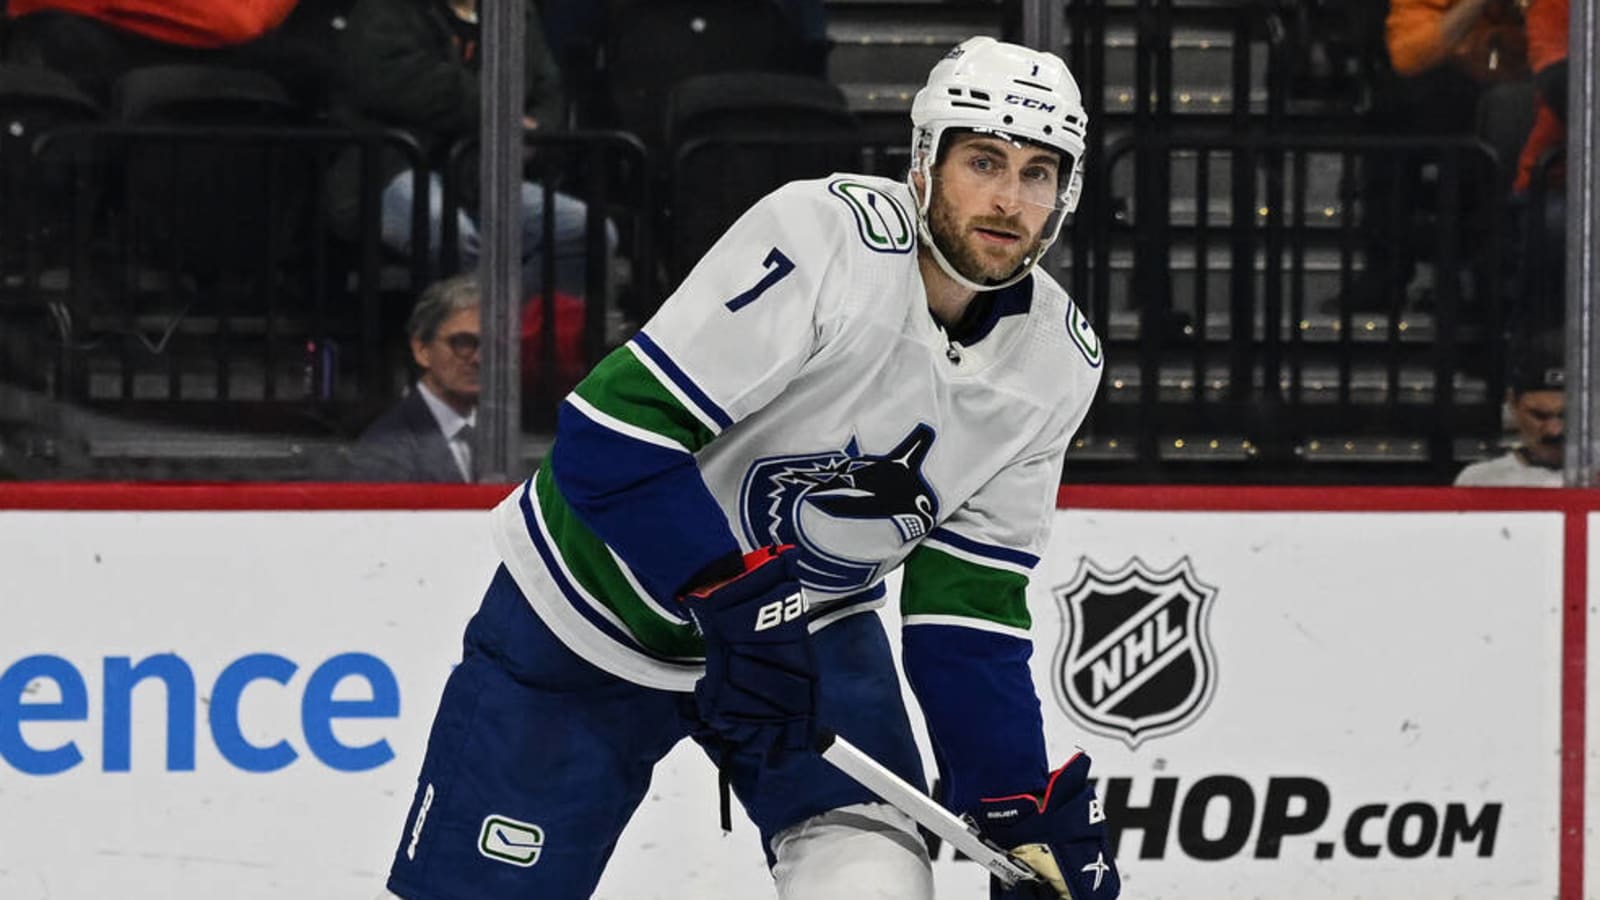 Canucks HC provides injury update on Carson Soucy